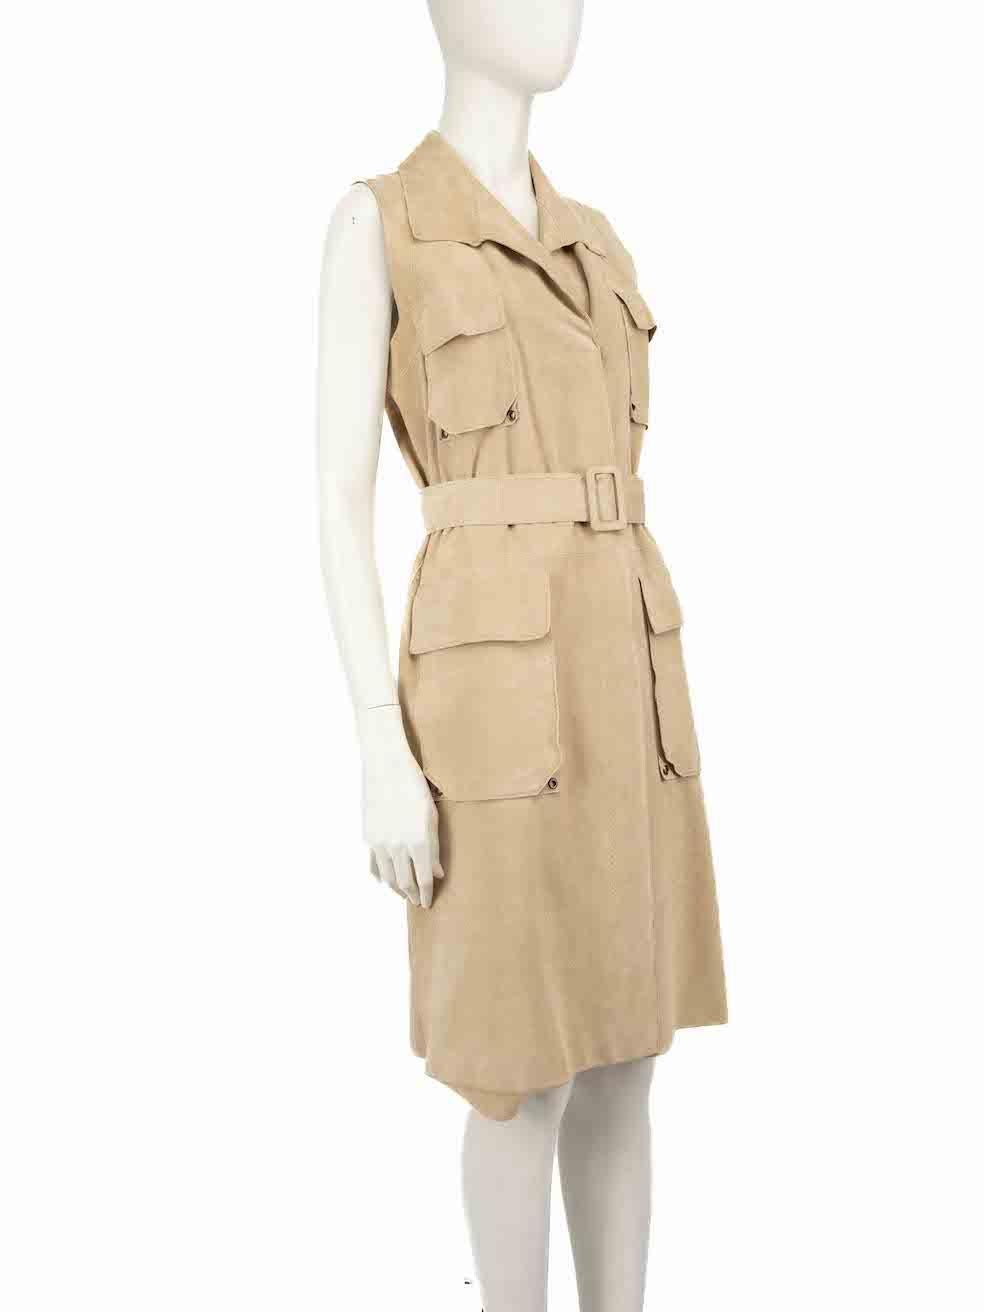 CONDITION is Very good. Minimal wear to jacket is evident. Minimal loose thread to the right underarm and the right shoulder seam has slightly come apart on this used J.Mendel designer resale item.
 
 
 
 Details
 
 
 Beige
 
 Suede
 
 Long vest
 
